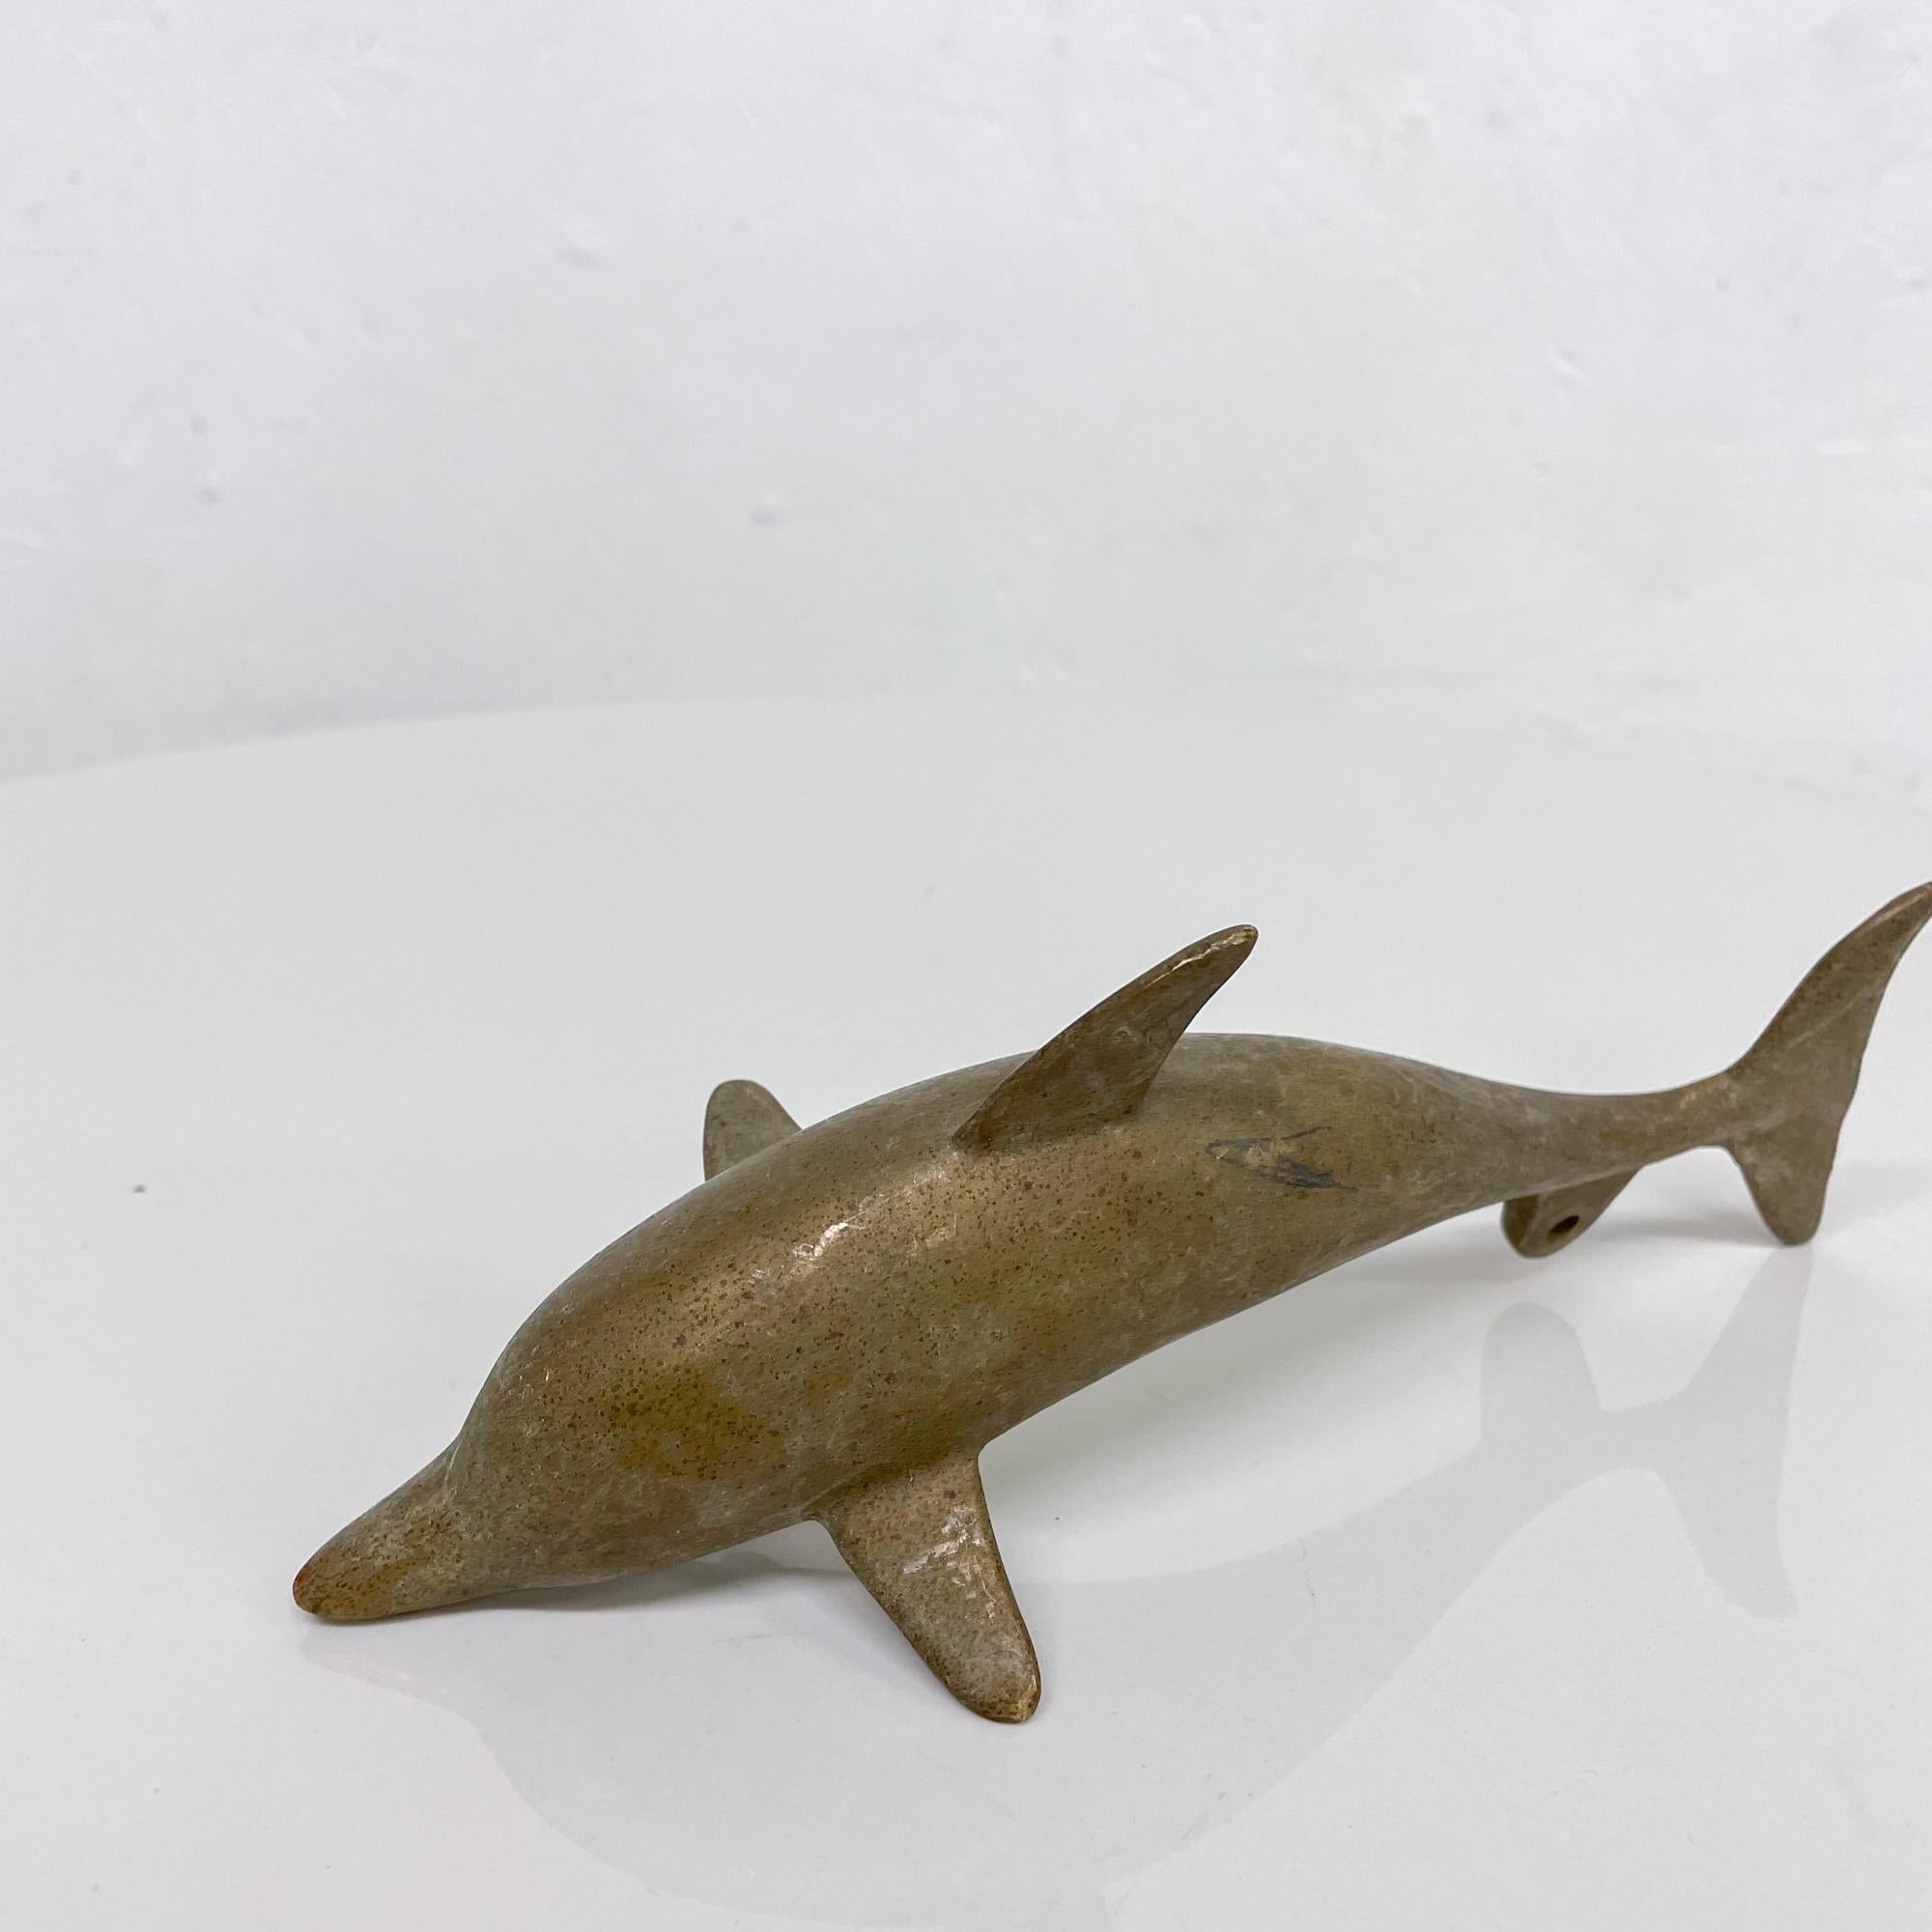 Late 20th Century Solid Brass Paperweight Dolphin Sculpture Hangable Art Piece, 1970s